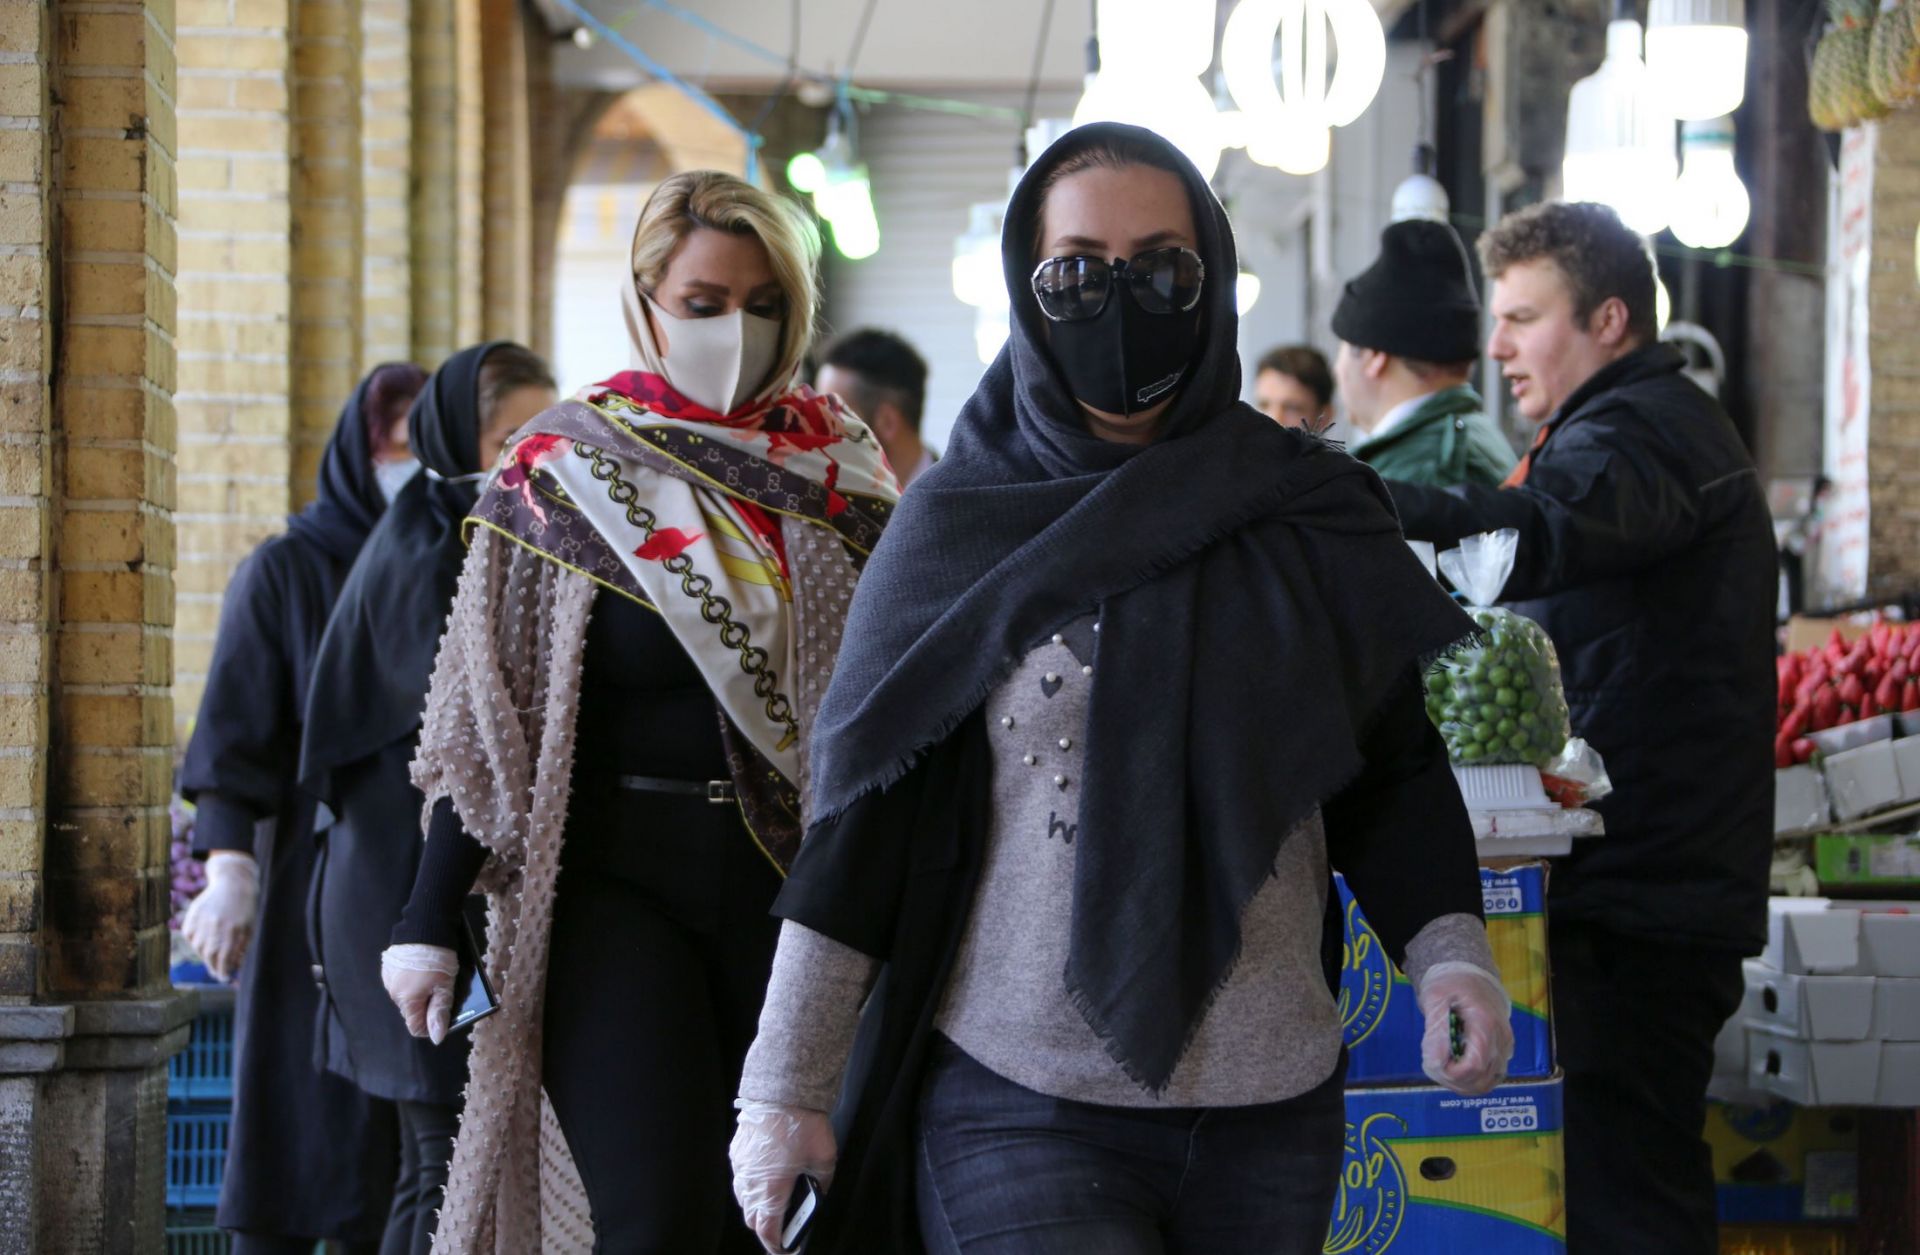 Shoppers wear protective face masks in a bid to prevent the spread of COVID-19 in a market on April 5, 2020, in the Iranian capital of Tehran. 